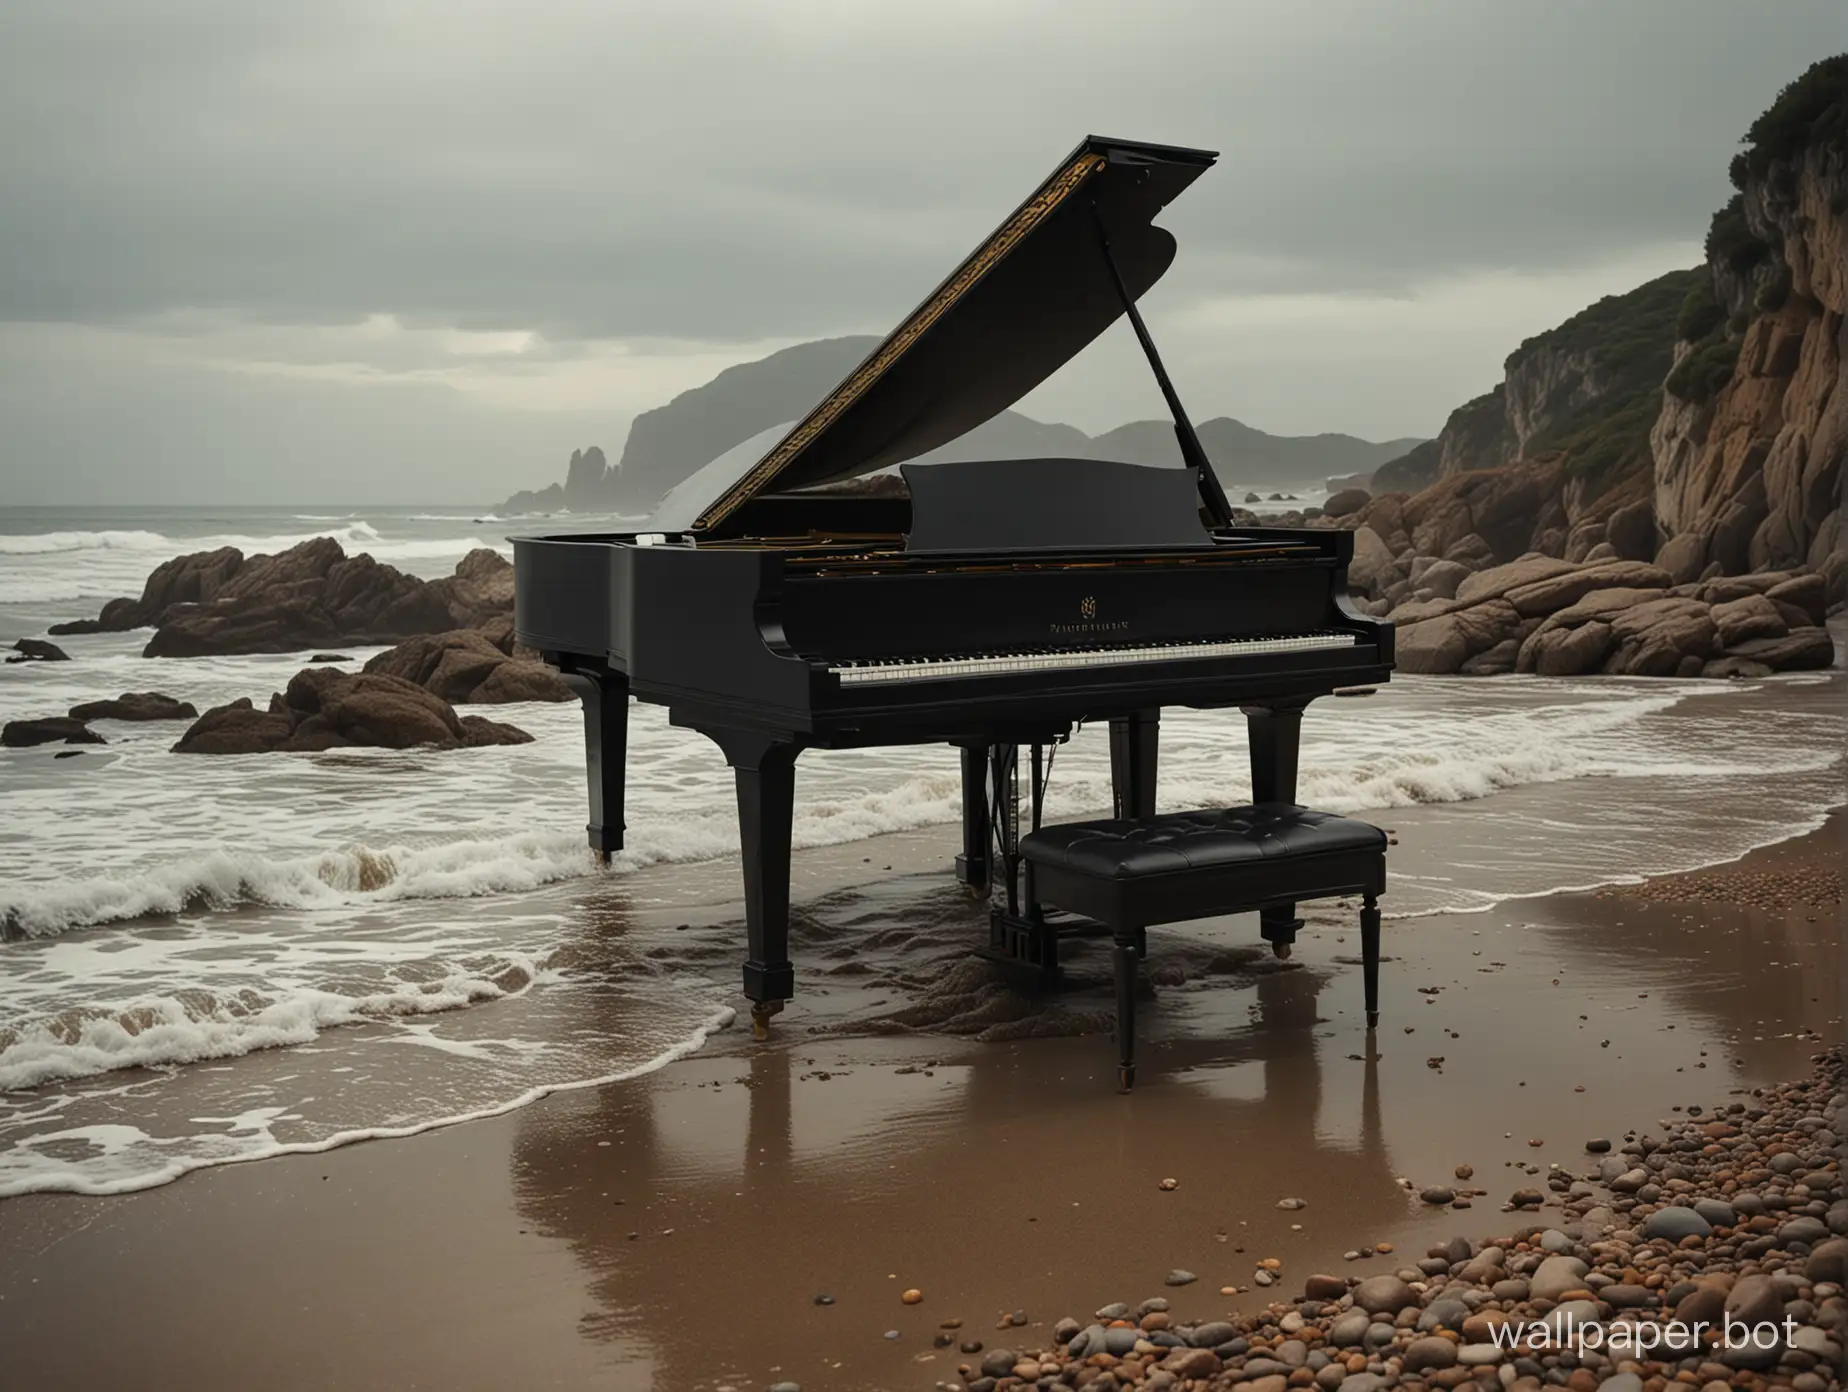 cannes film festival movie still of a steinway piano in a stormy rainy beach,dark vacay,deru,gloom,bloom,understated elegance,high fashion,haute couture,avant-garde style editorial fashion shot,delicate detailing,subtle texture,soft-focus effect,soft shadows,minimalist aesthetic,gentle illumination,elegant simplicity,serene composition timeless appeal,visual softness,extremely high quality high detail RAW color photo,professional lighting,sophisticated color grading,sharp focus,soft bokeh,striking contrast,dramatic flair,depth of field,seamless blend of colors,CGI digital painting,cinematic still 35mm,CineStill 50D,800T,natural lighting,shallow depth of field,crisp details,hbo netflix film color LUT,32K,UHD,HDR,film light,panoramic shot,breathtaking,hyper-realistic,ultra-realism,high-speed photography,perfect contrast,award-winning phography,lars von trier style,stairway to heaven directed by bong Joon-ho and park chan-wook